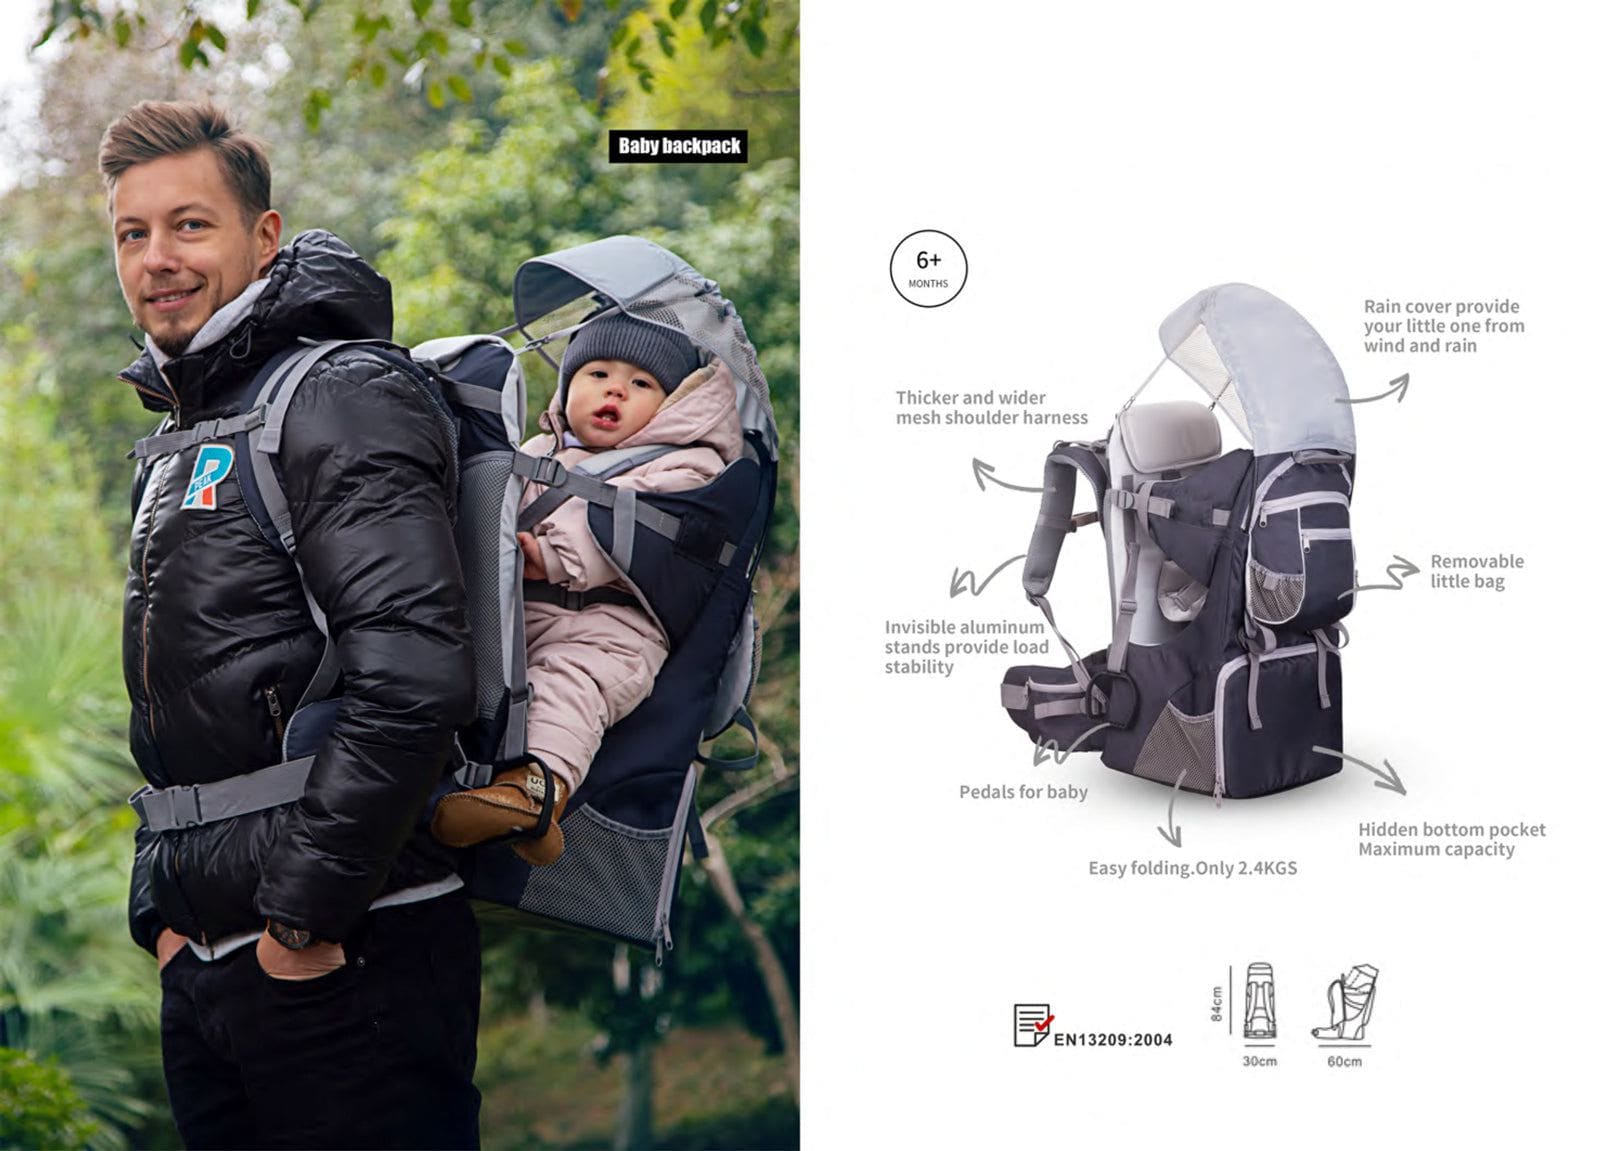 Deluxe Baby Backpack Hiking Child Carrier